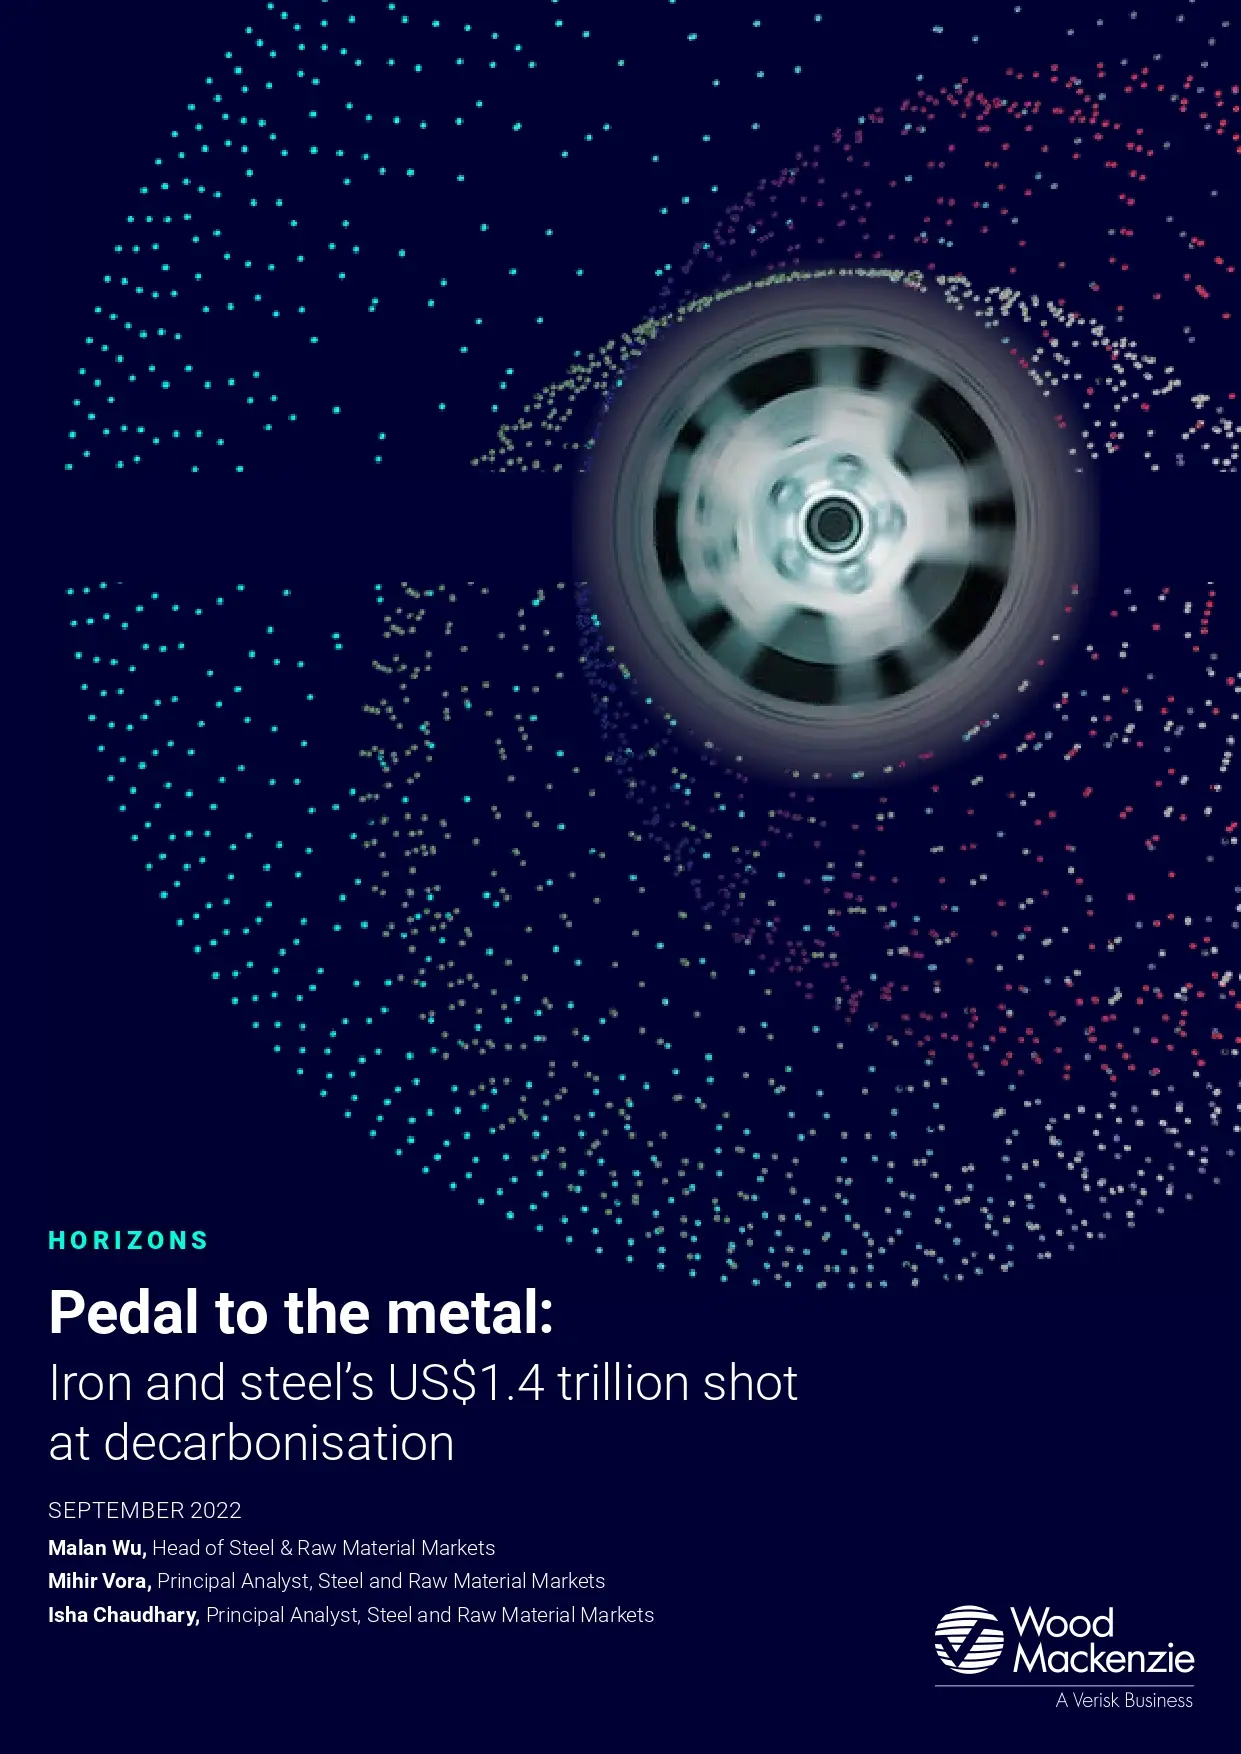 Pedal To The Metal Iron And Steel’s US$1.4 Trillion Shot At Decarbonisation